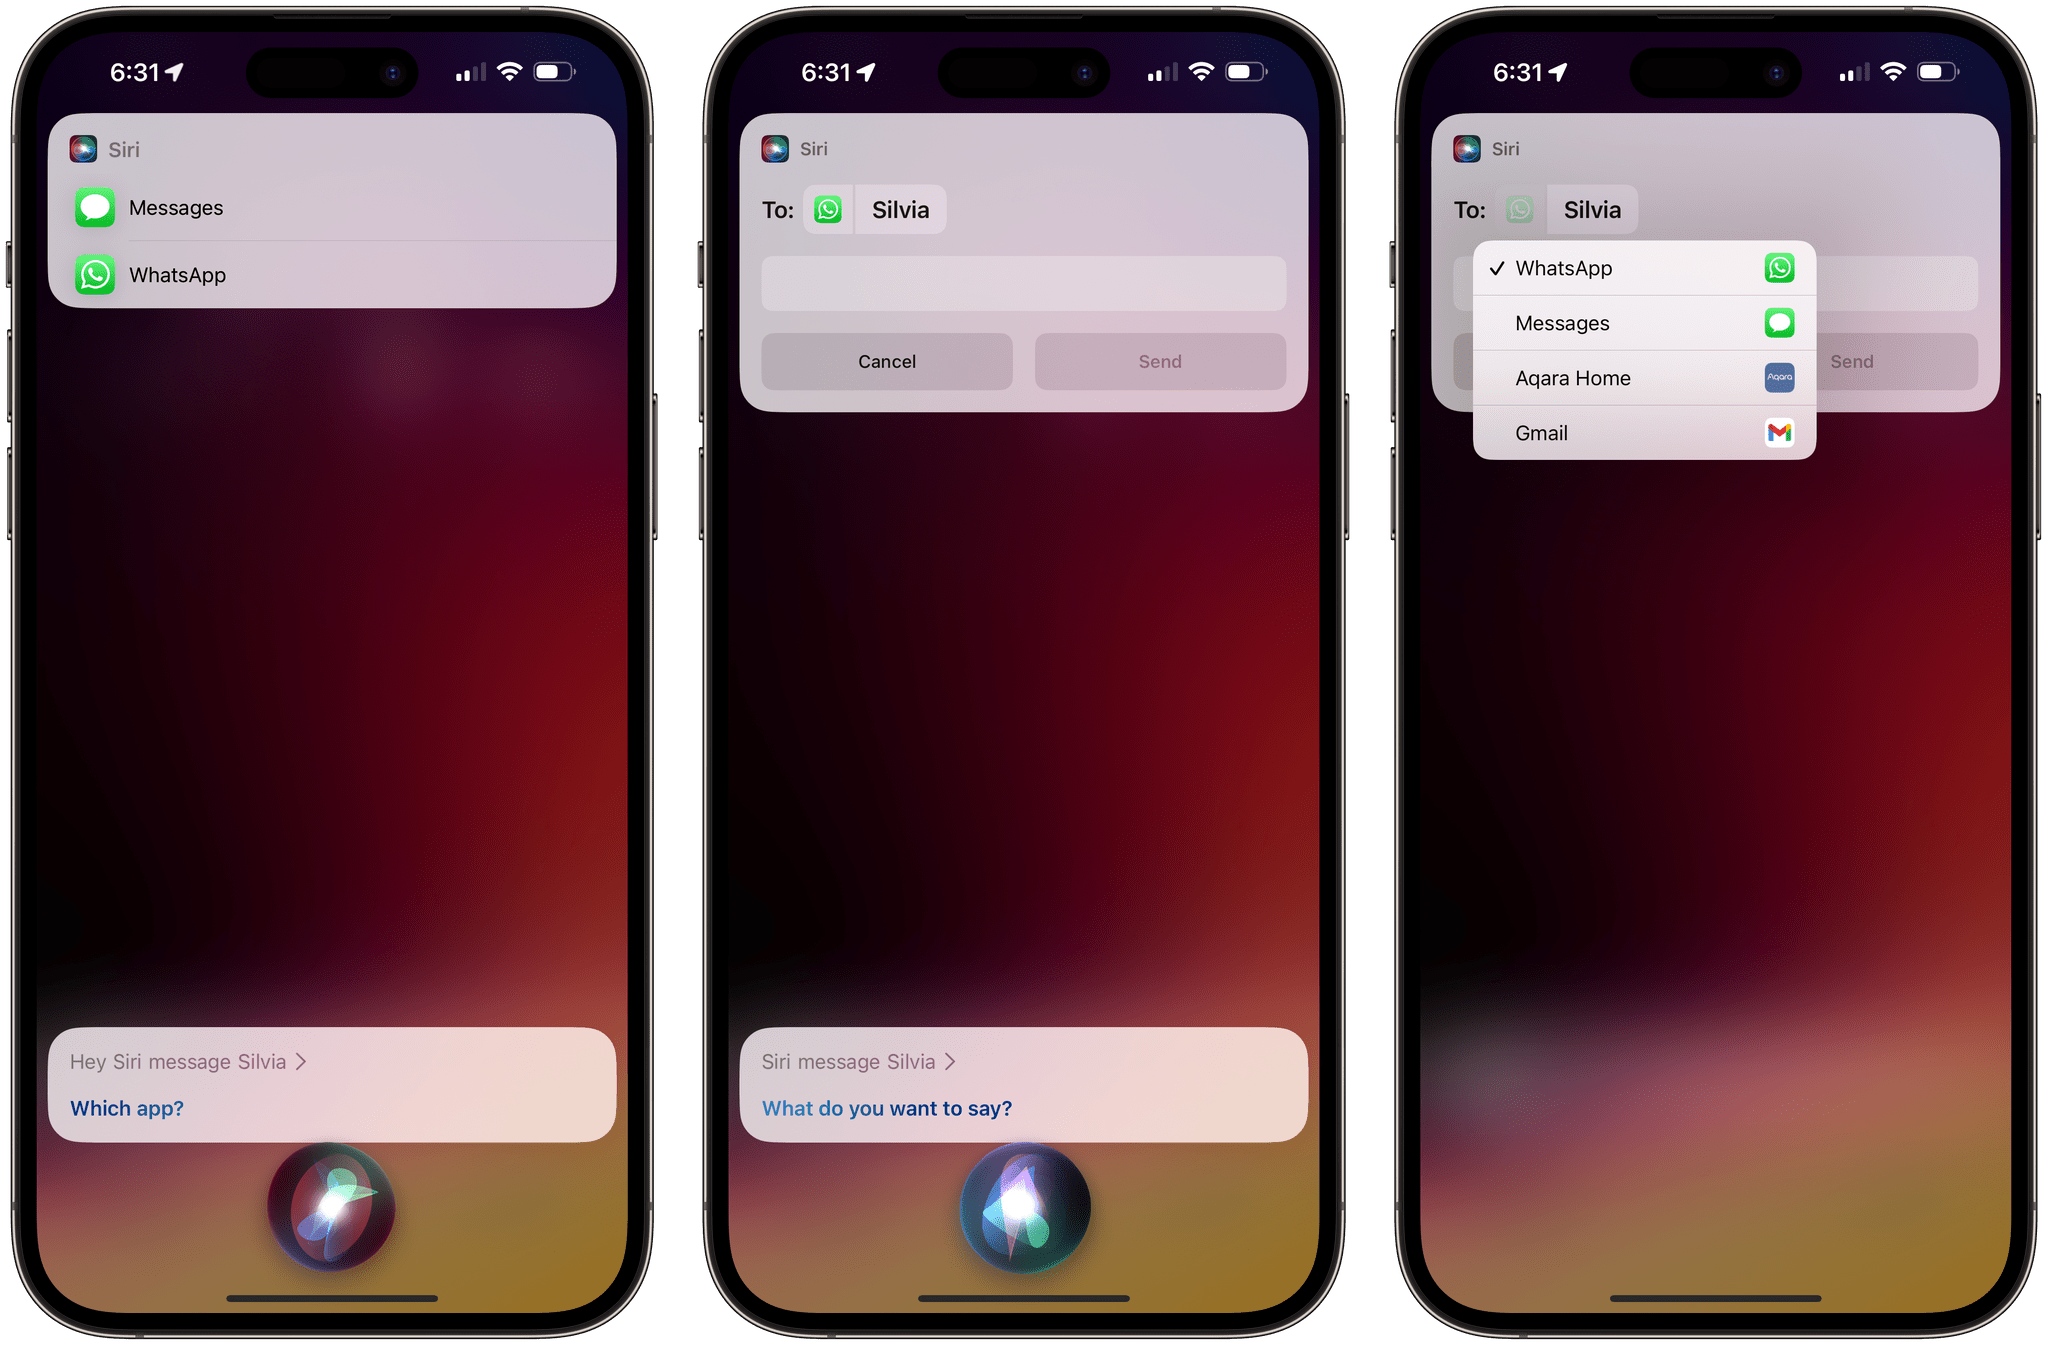 Selecting a different messaging app for a contact via Siri. I was also prompted to pick an app for regular phone calls, but not as frequently as for messaging requests.